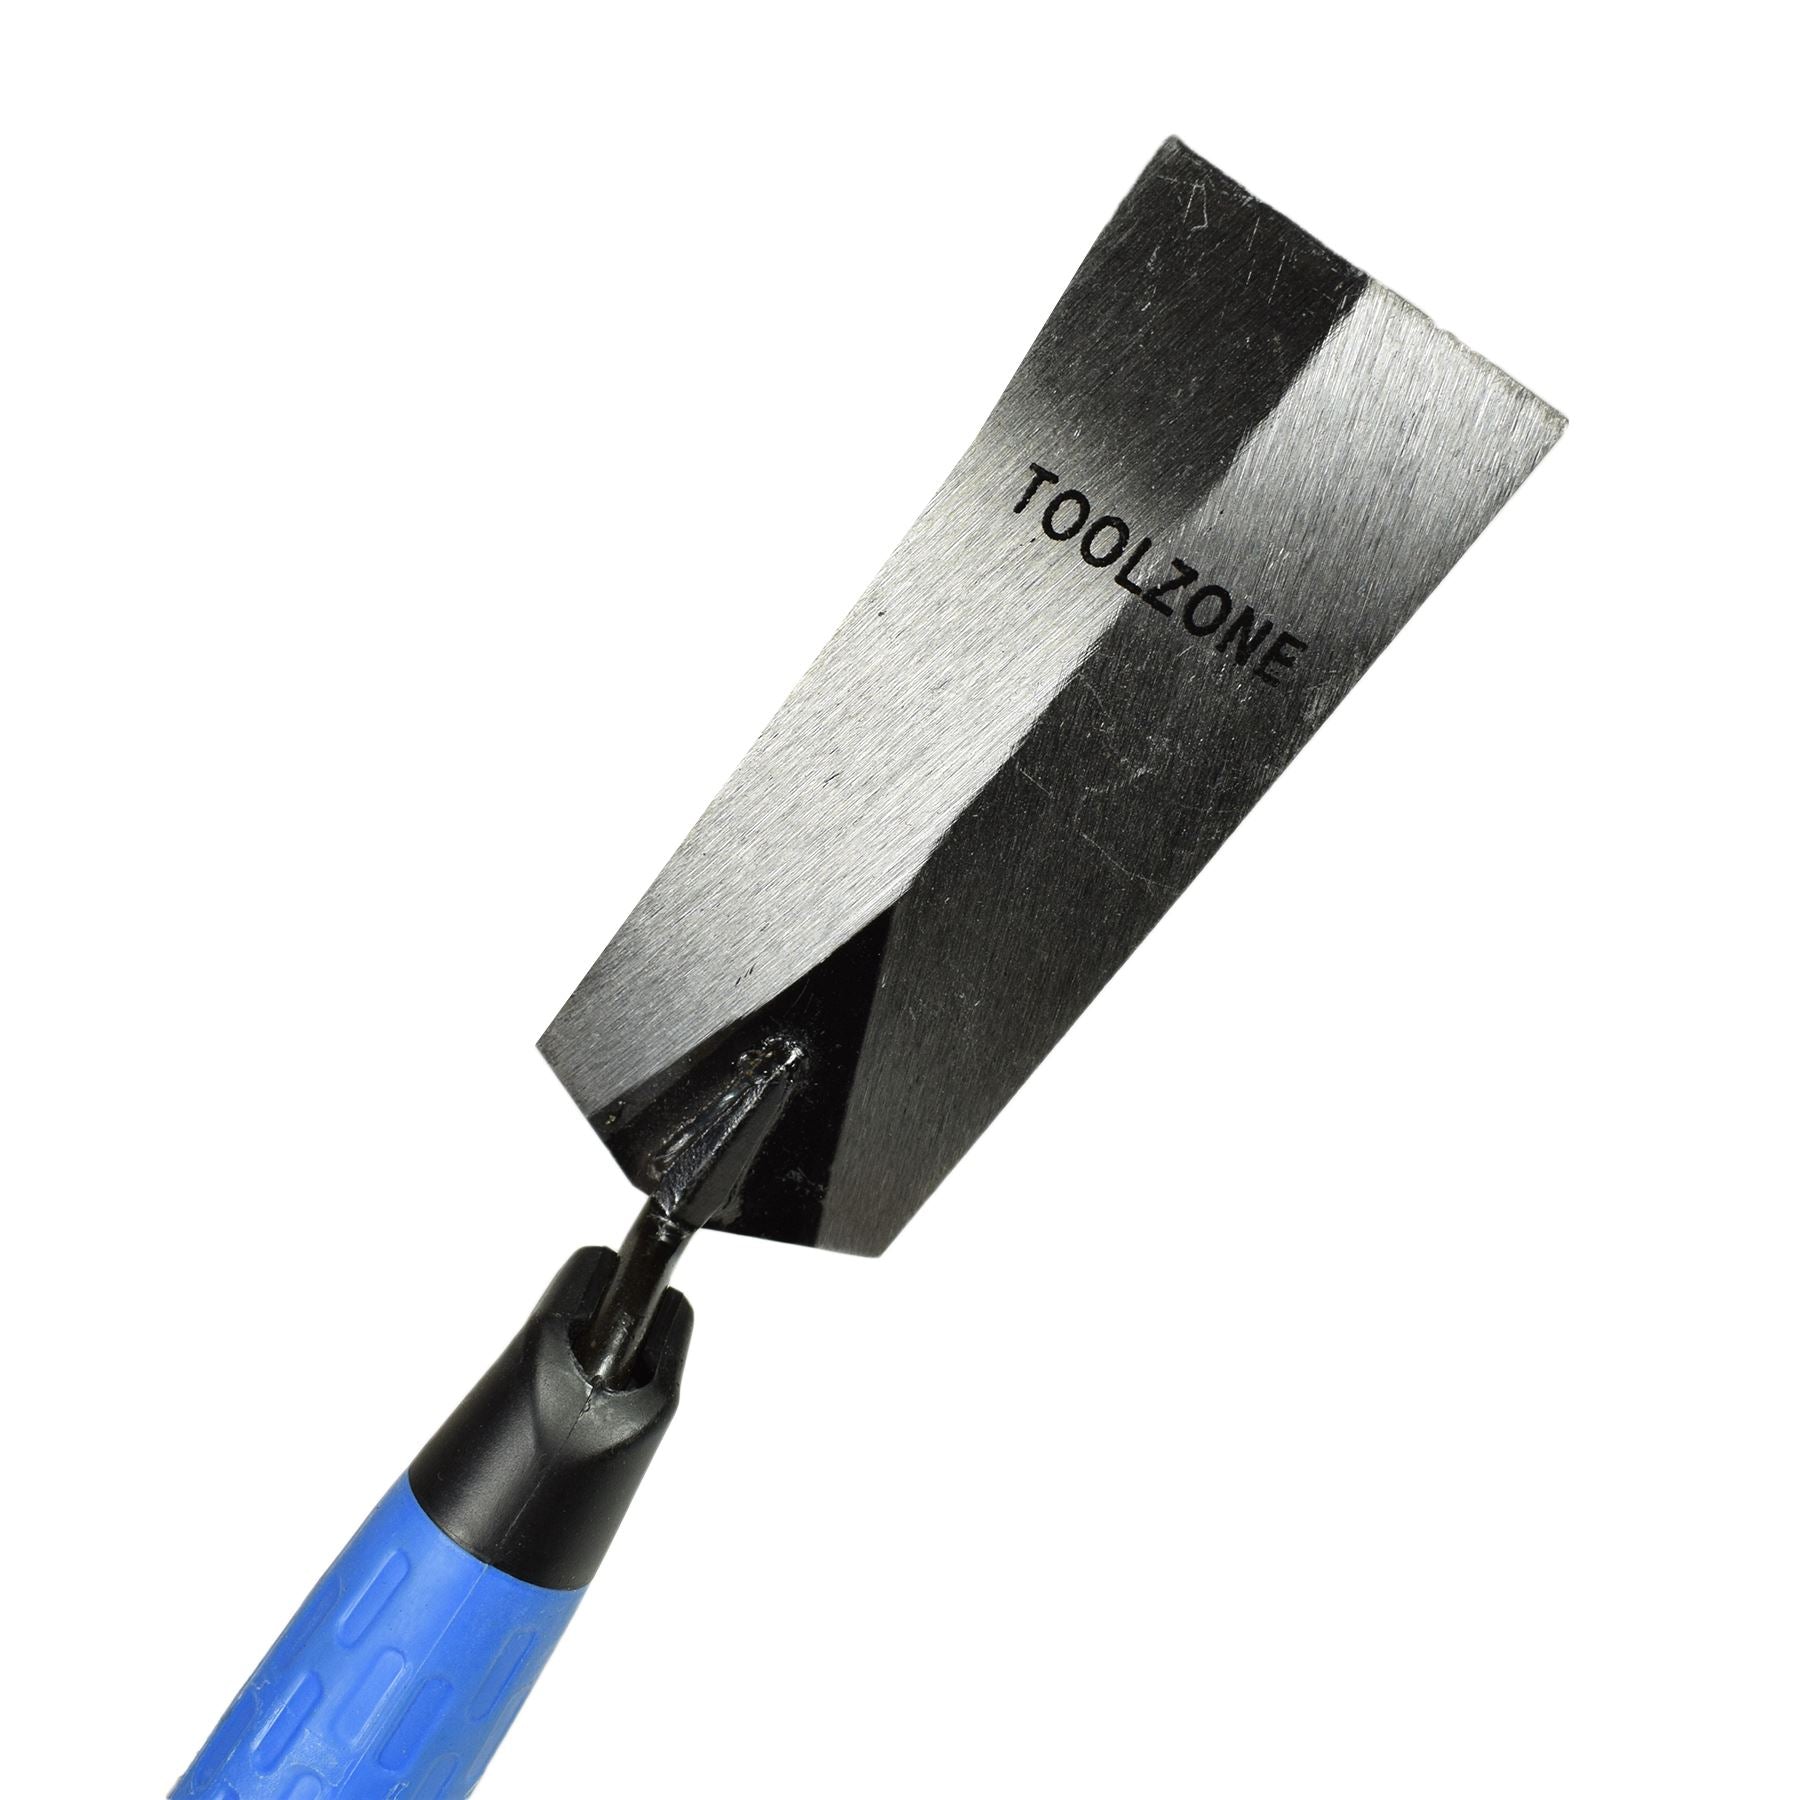 2" / 50mm Margin Grout Trowel Concrete Plastering Tool With Soft Grip Handle